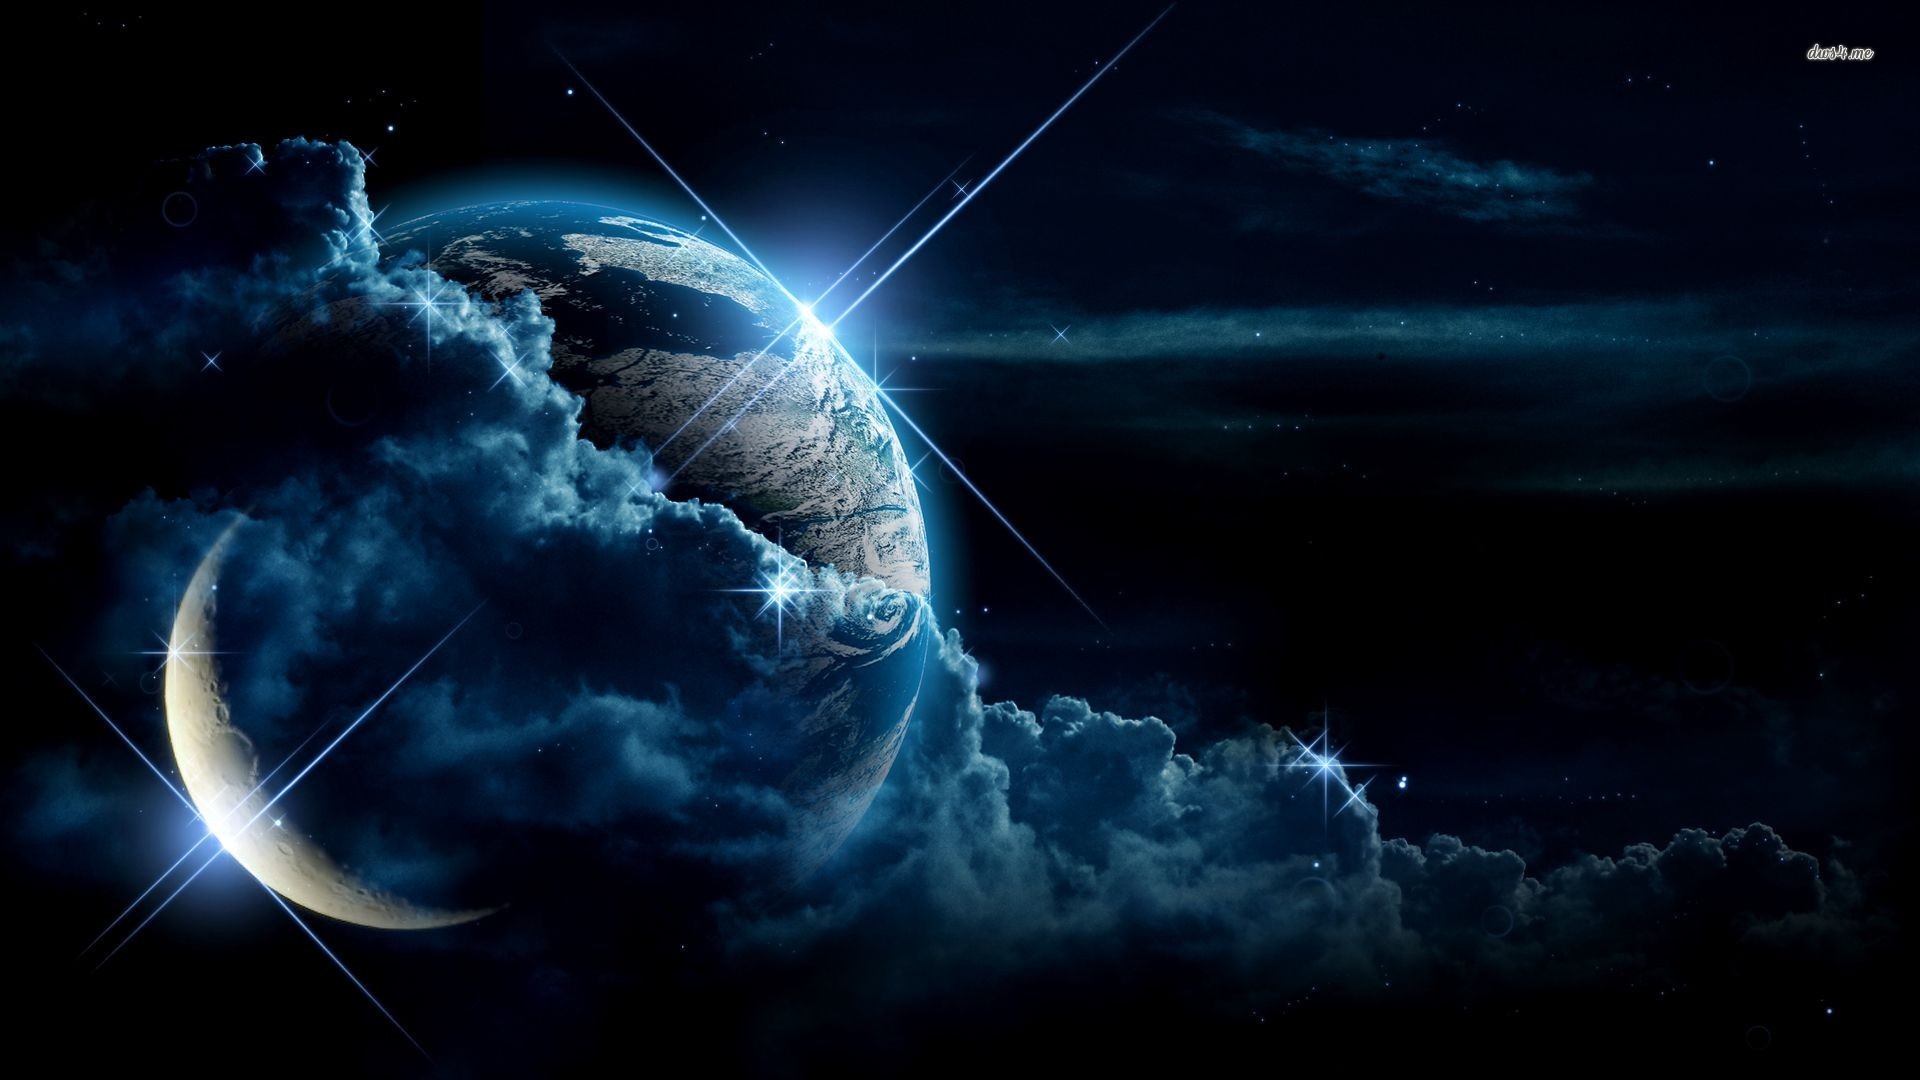 From Space Puter Wallpaper Desktop Background Id